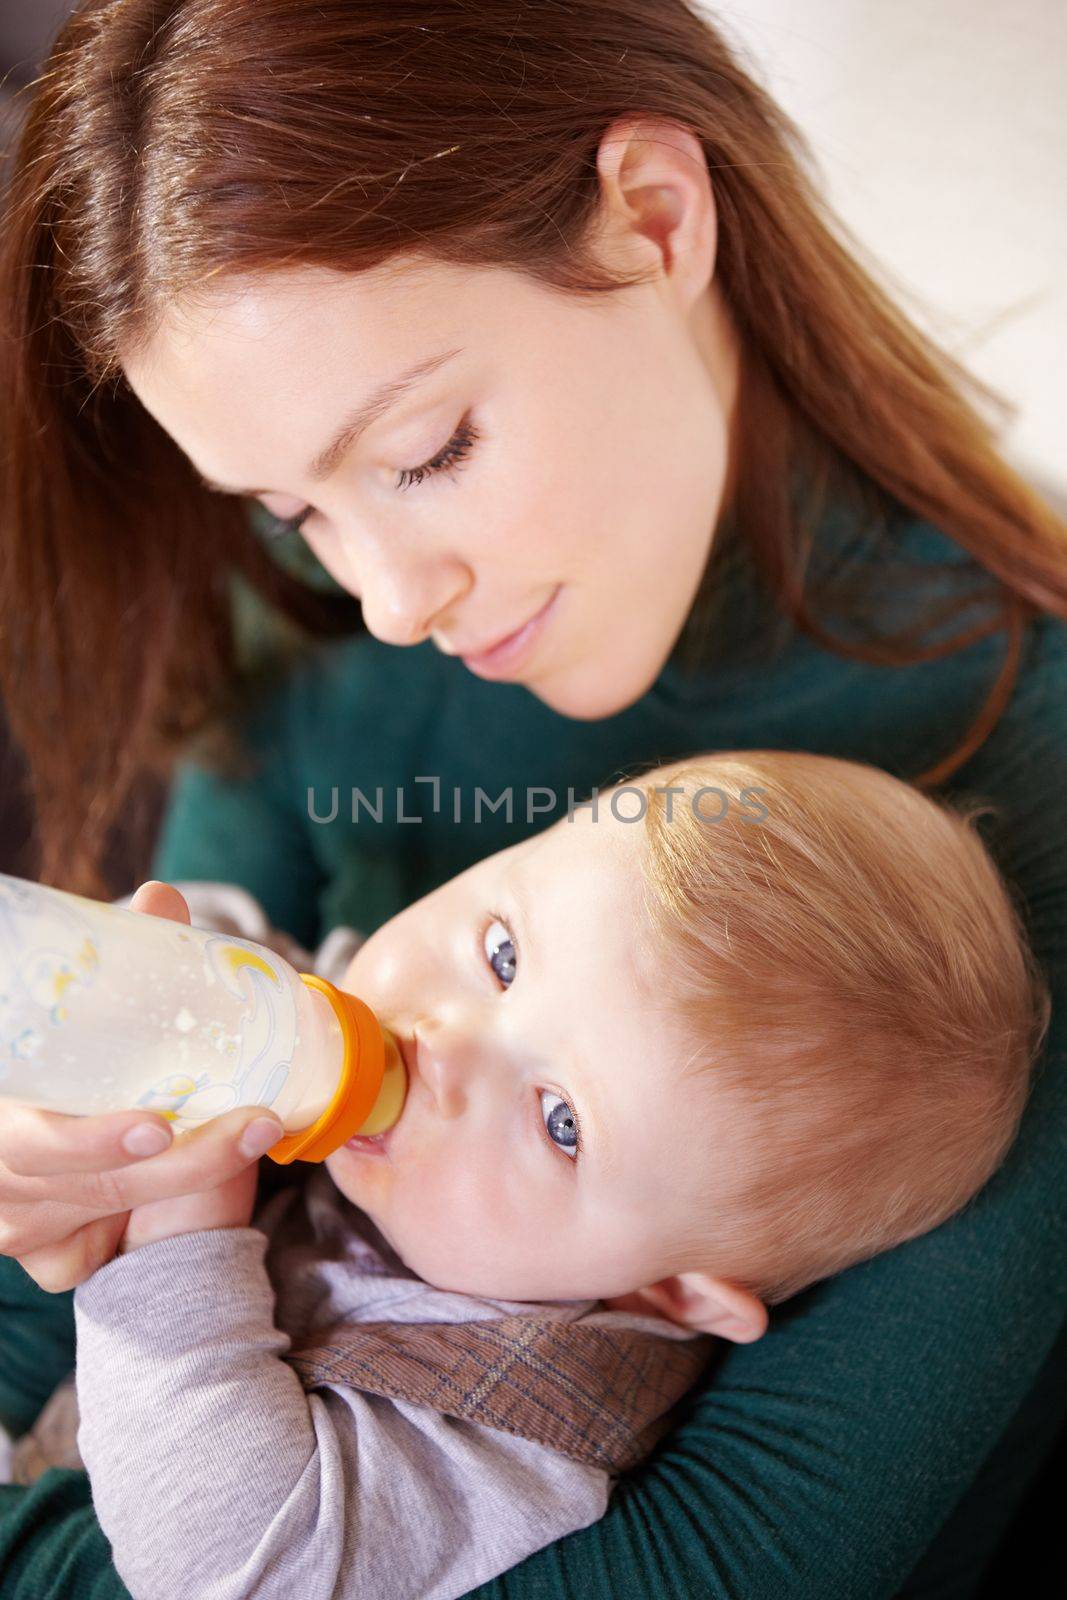 Getting all the nutrients he needs. Pretty young mother bottle-feeding her infant son